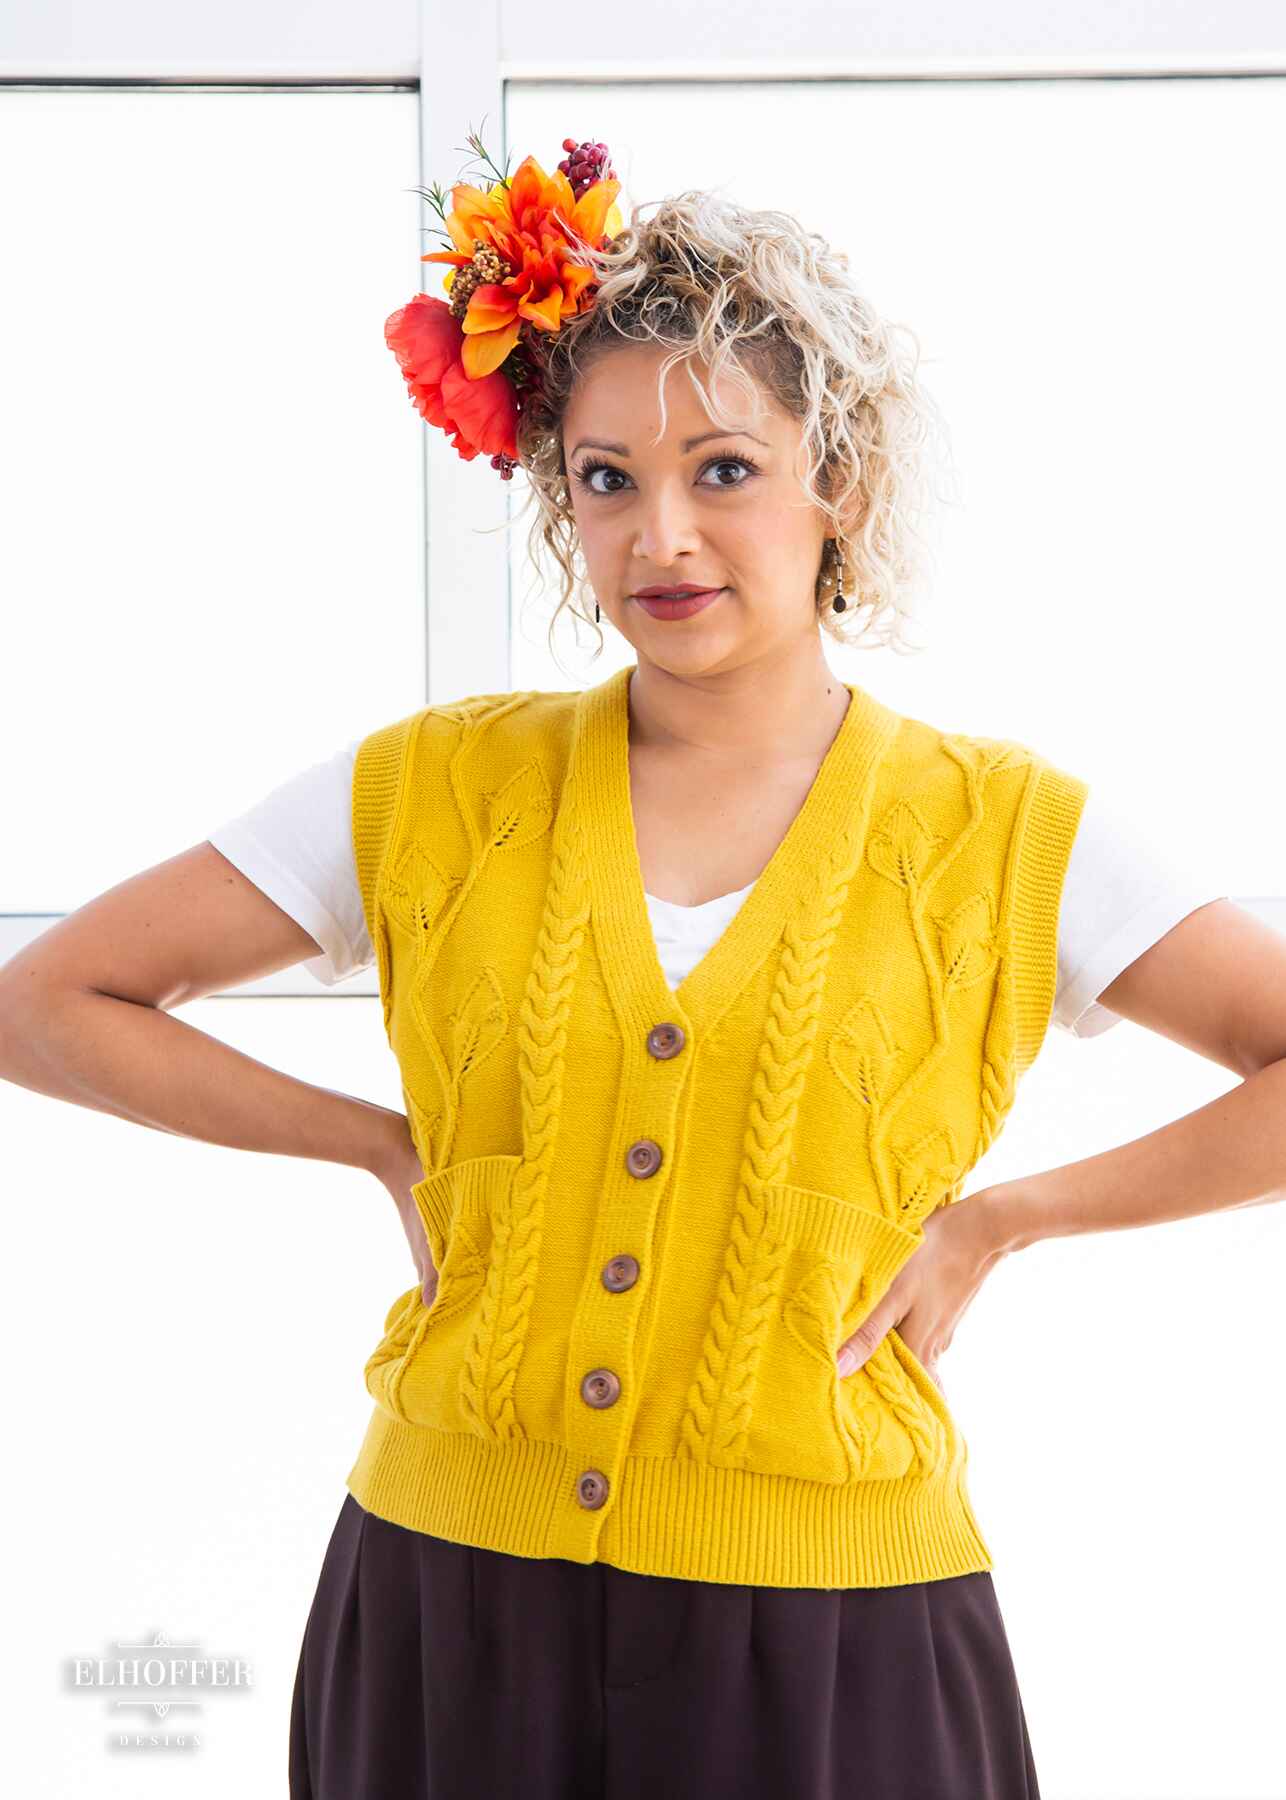 Simone, a light olive skinned S model with short platinum blonde curly hair, is wearing a golden yellow button up knit vest with a leafy vine and cable knit pattern, light brown buttons, and front pockets.